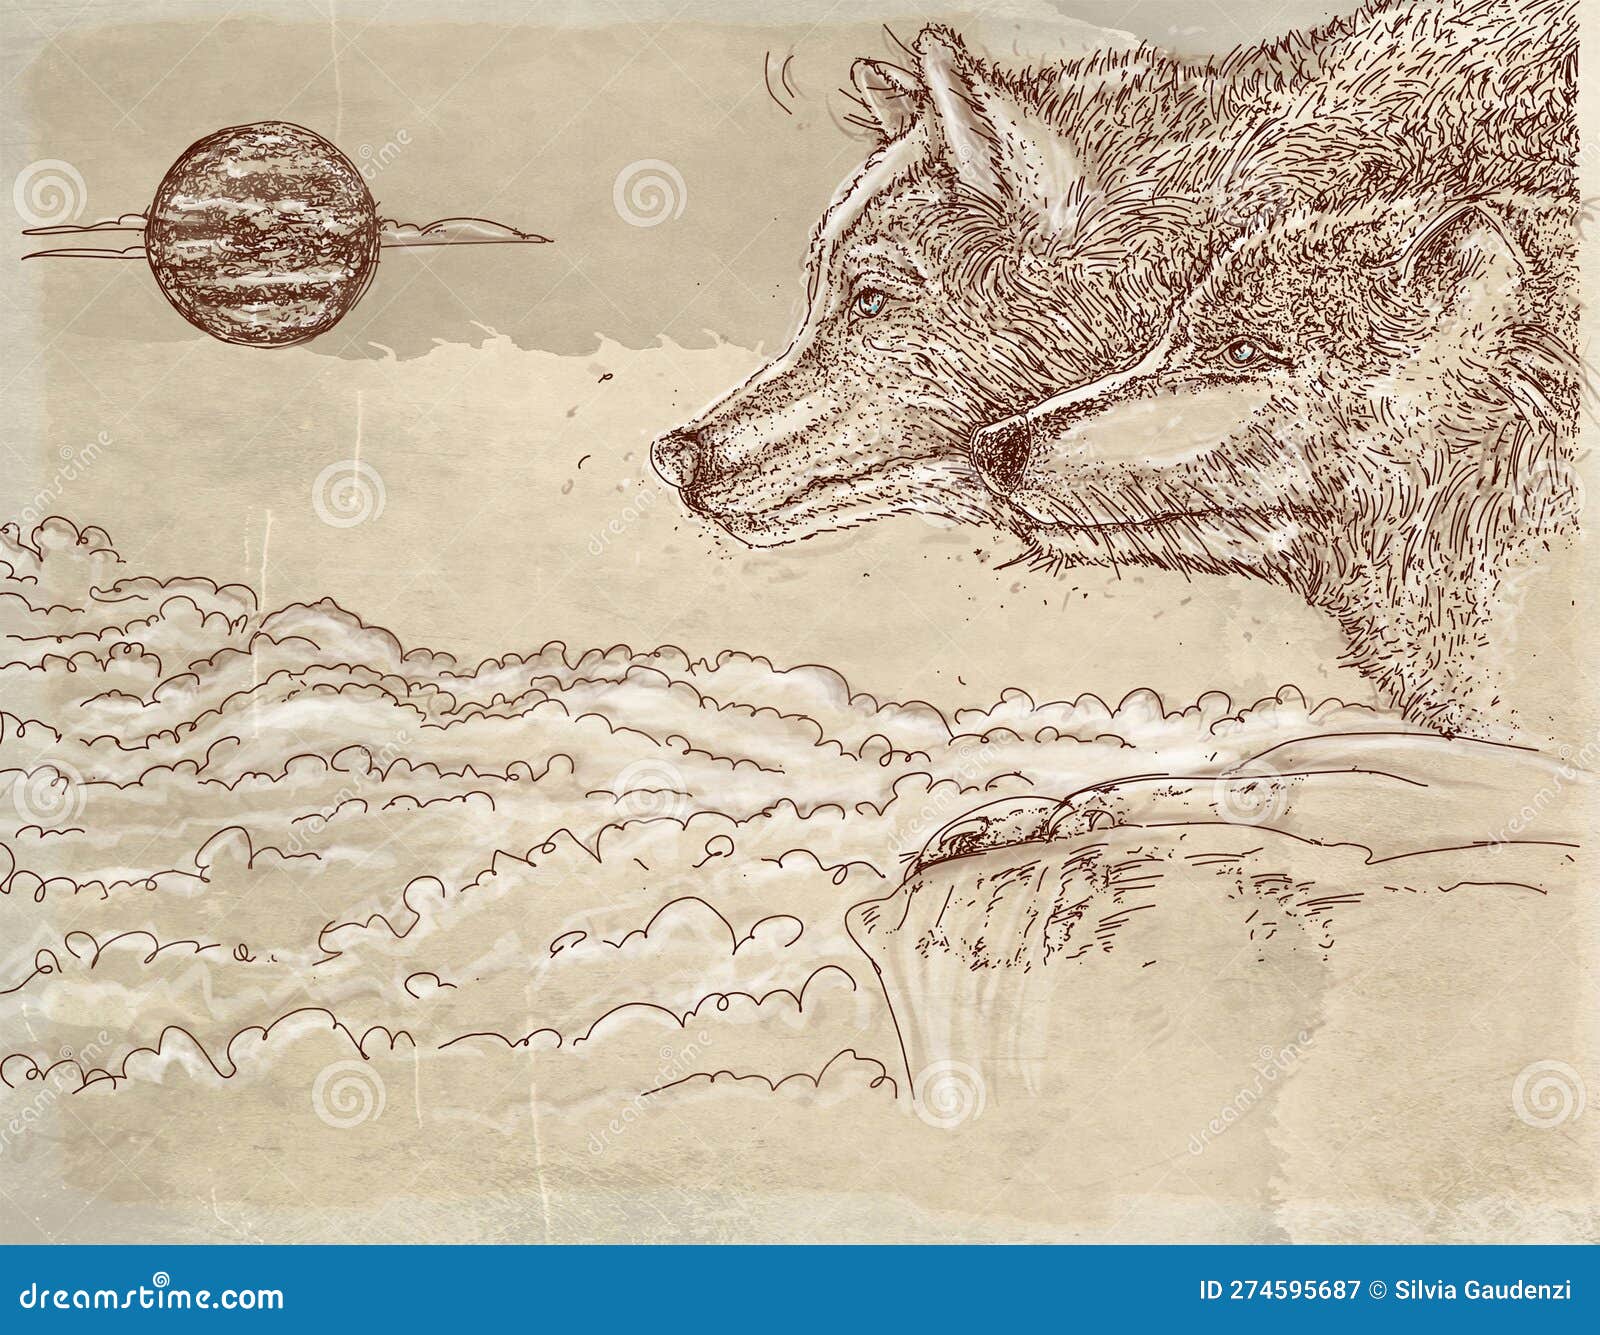 sketch of a wolf with the planet in the background..  .